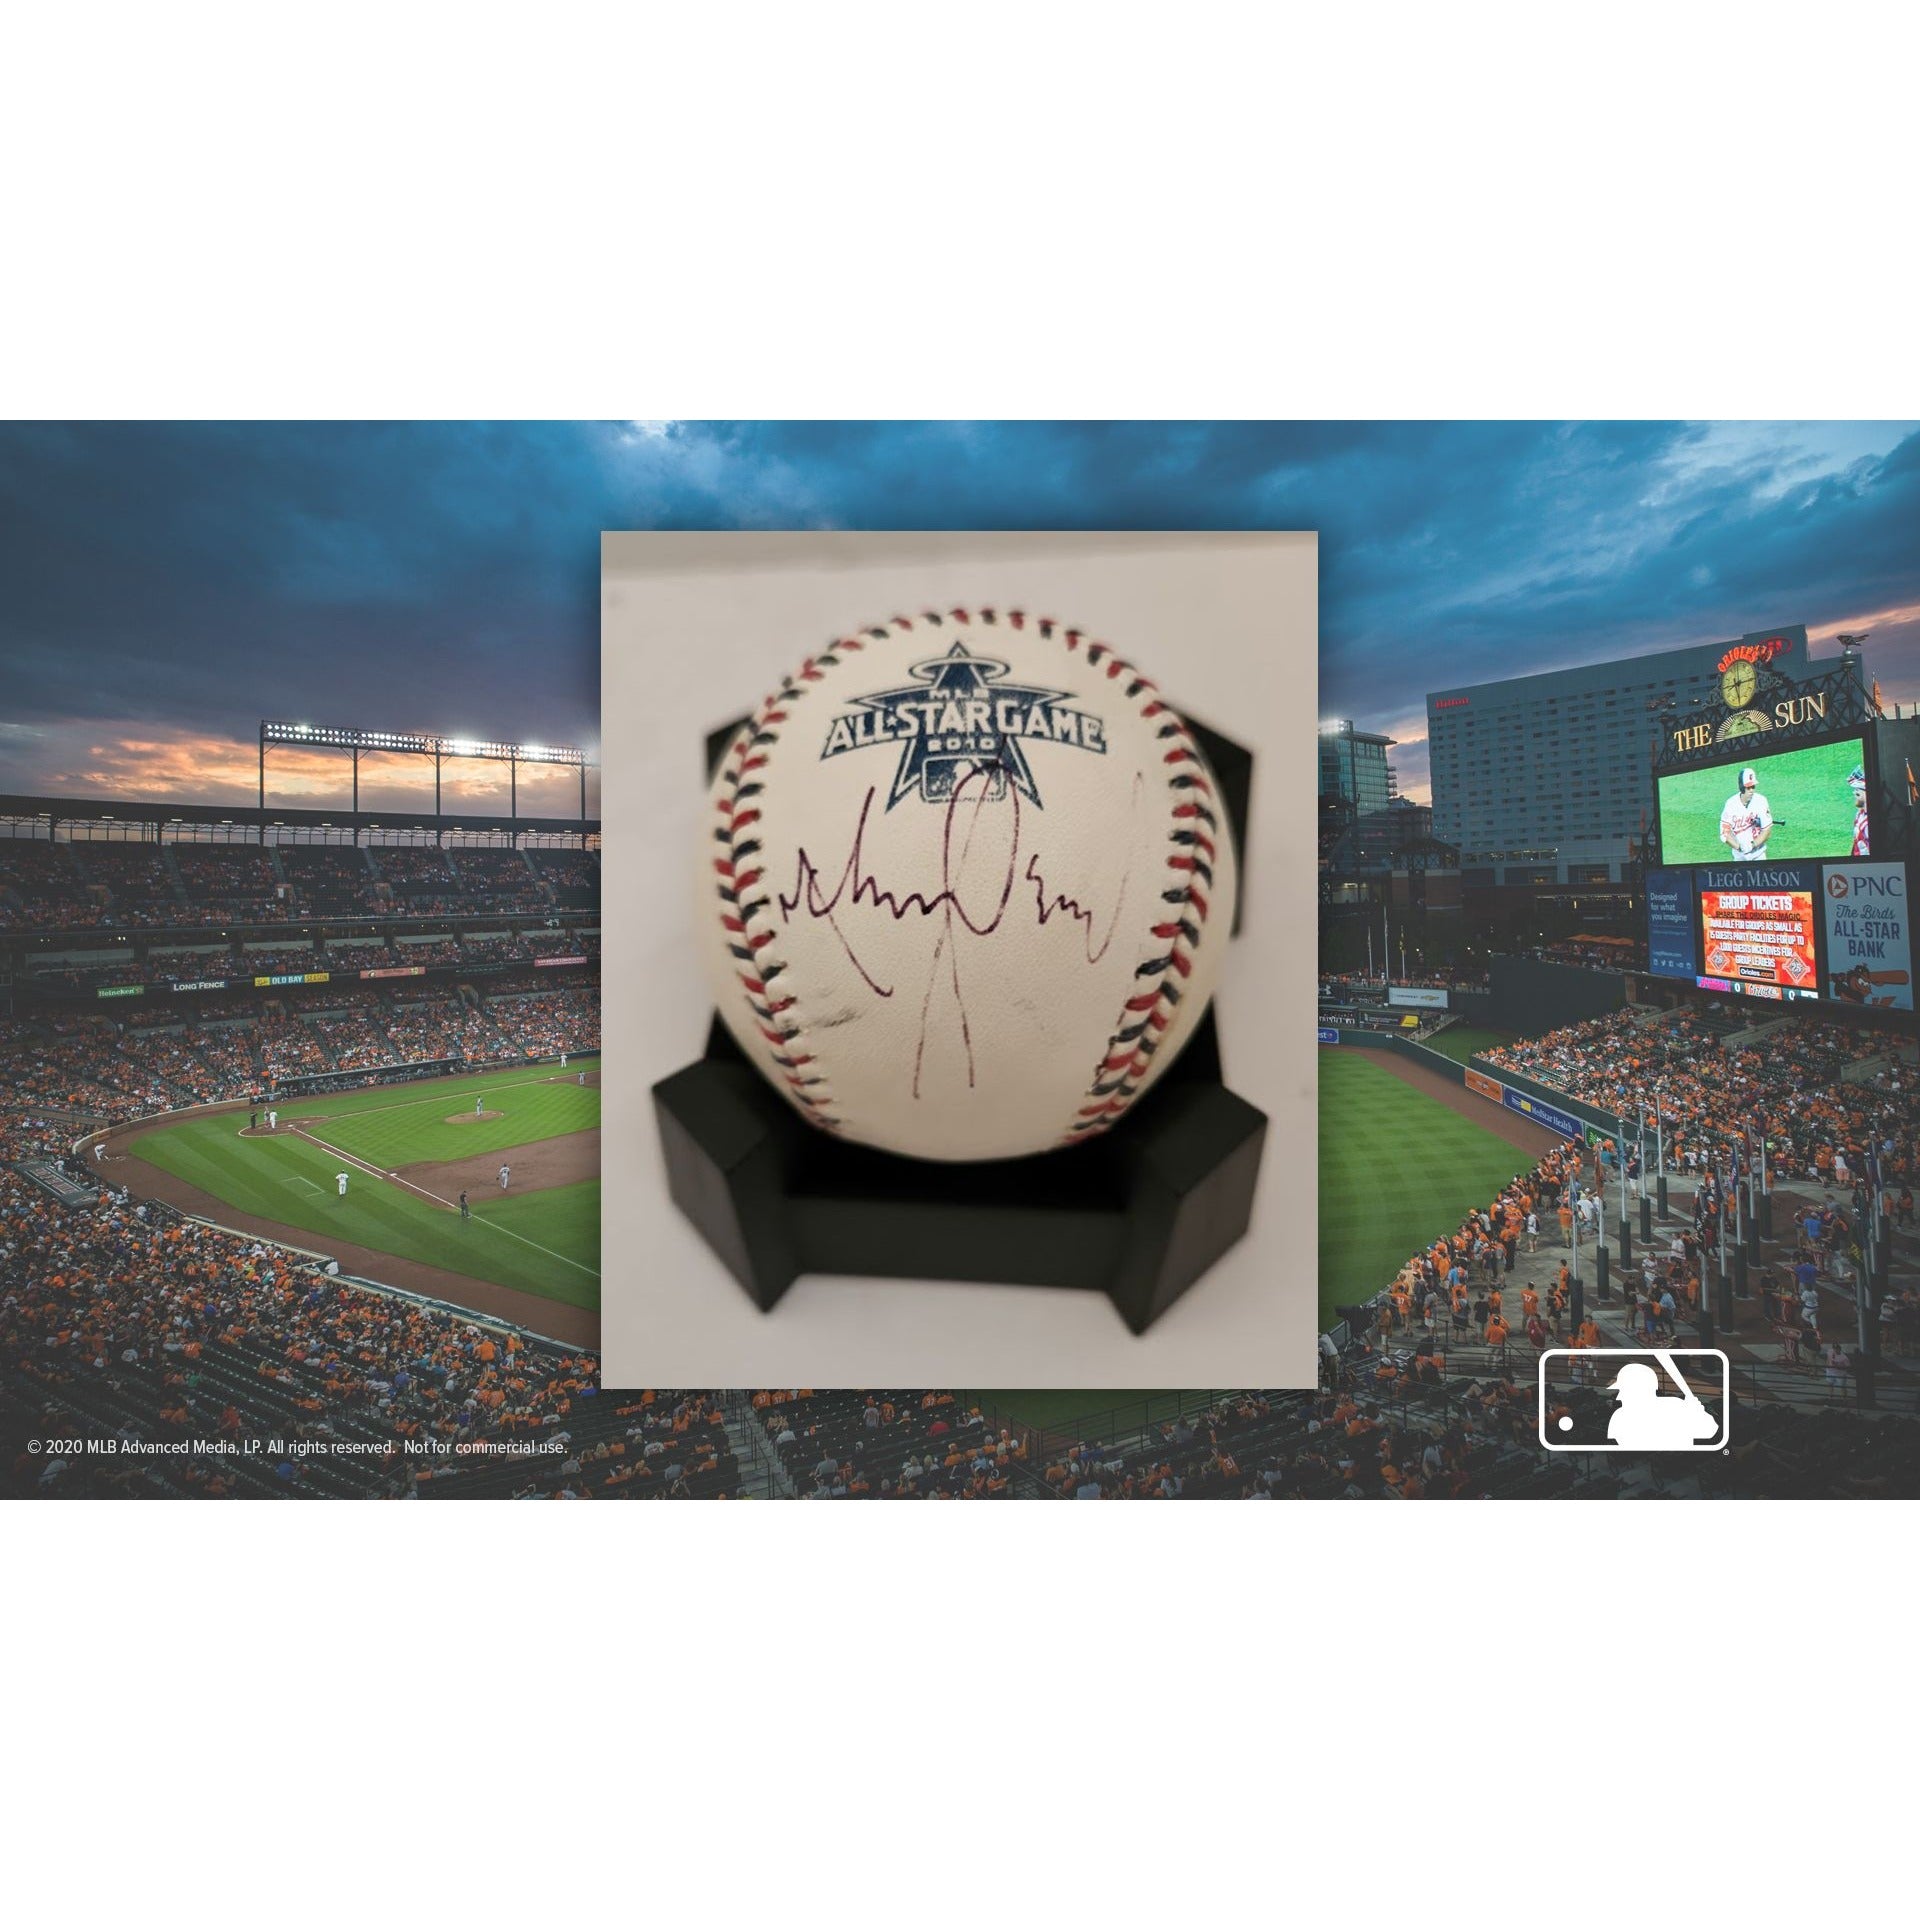 Michael Jackson MLB All-Star game baseball signed with proof free acrylic display case